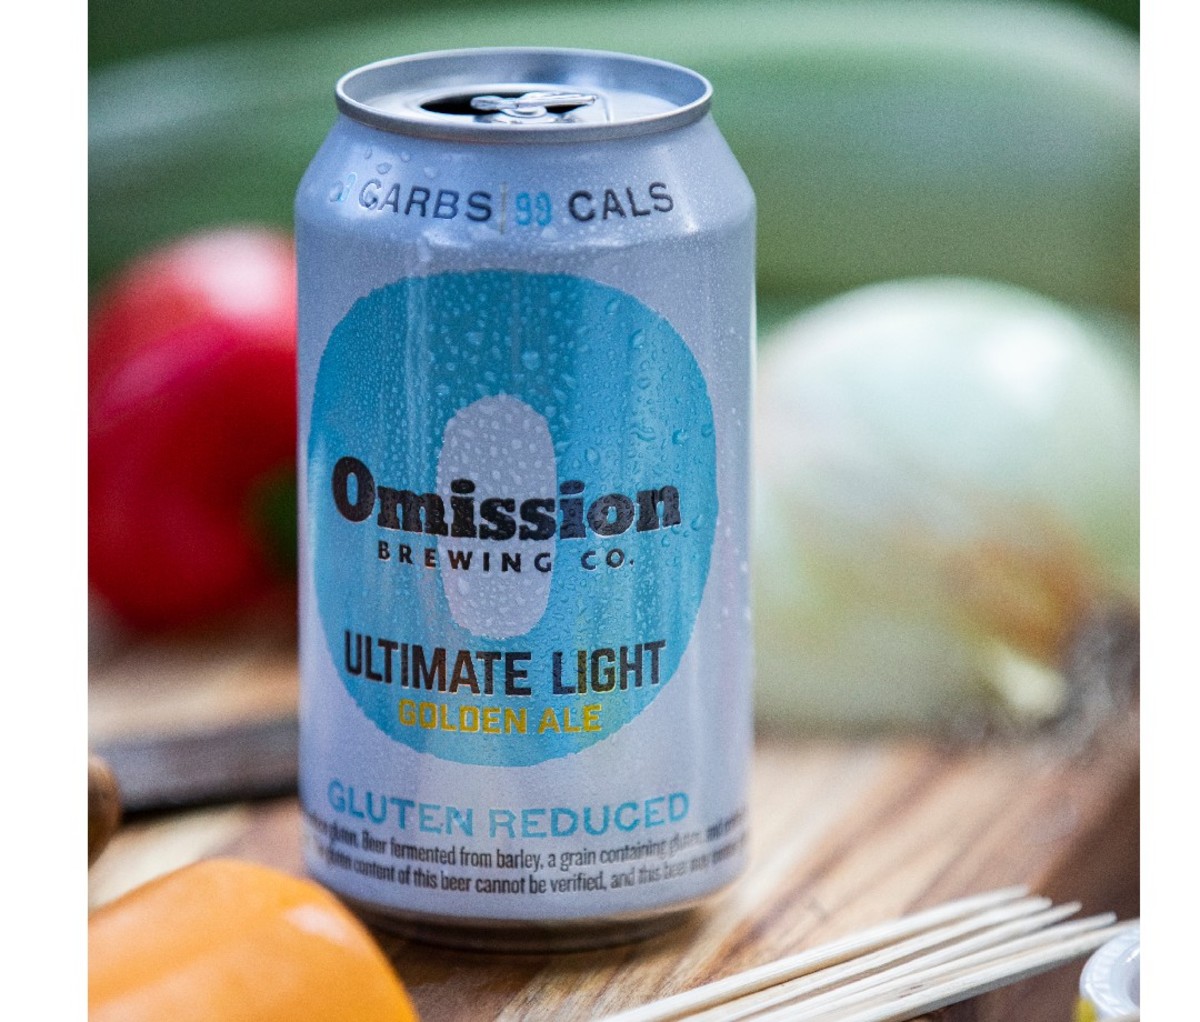 Can of gluten-reduced Omission Balanced Brewing Ultimate Light Golden Ale on a cutting board with vegetables in the background.